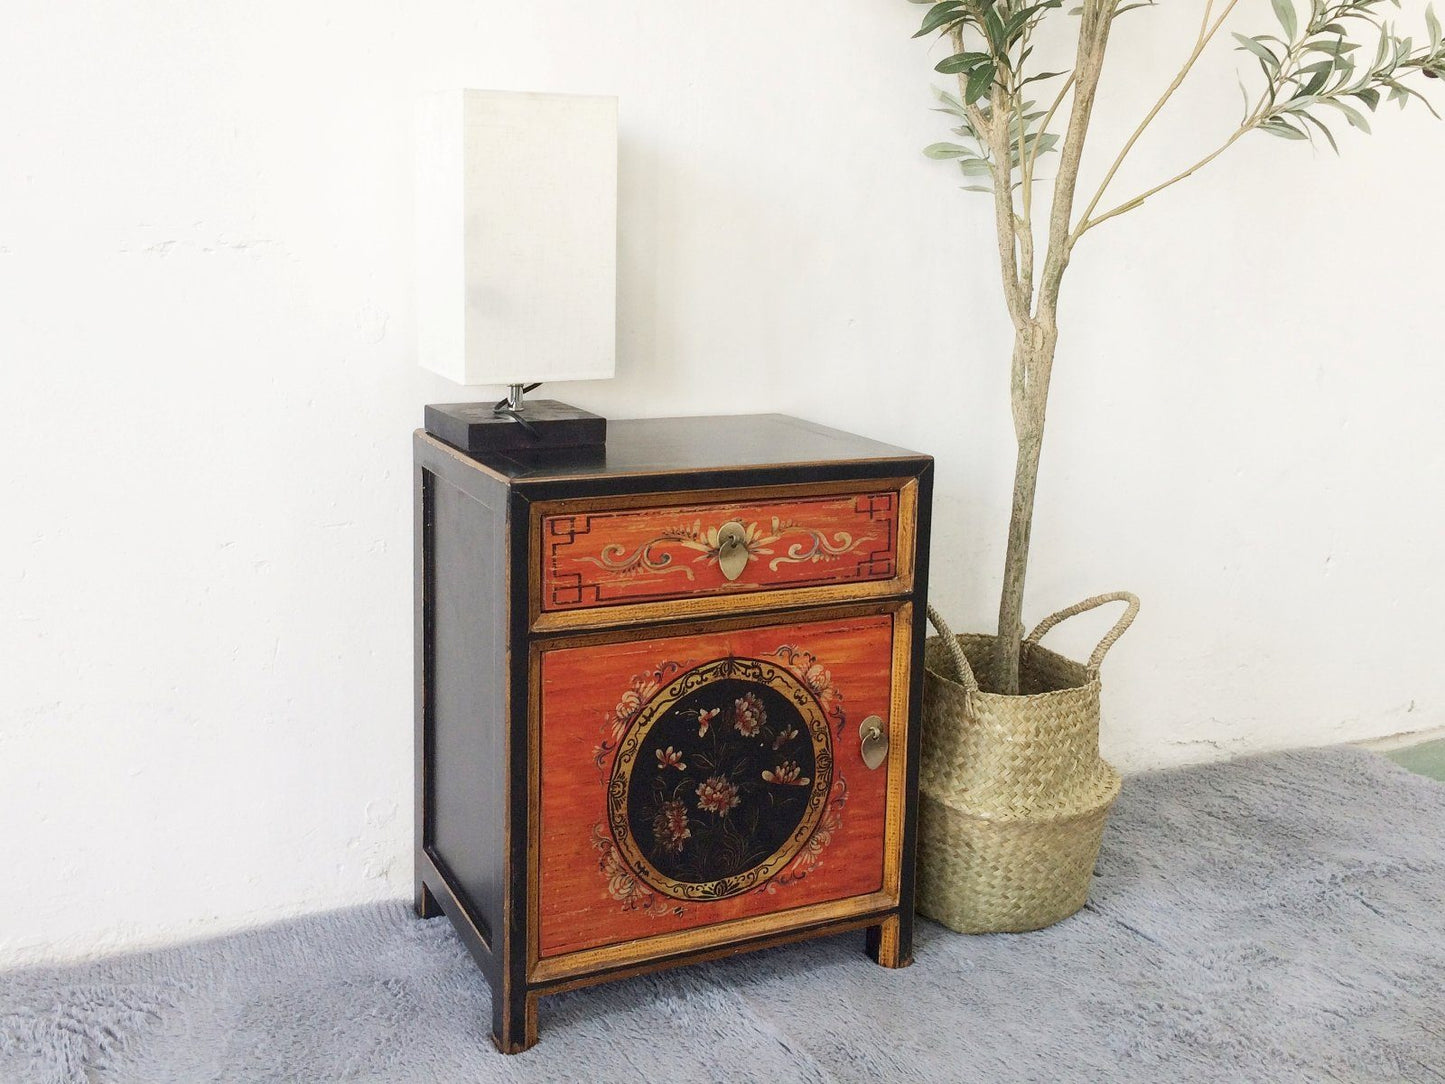 Chinese bedside table "Coalflowers" - Art. 35191-8